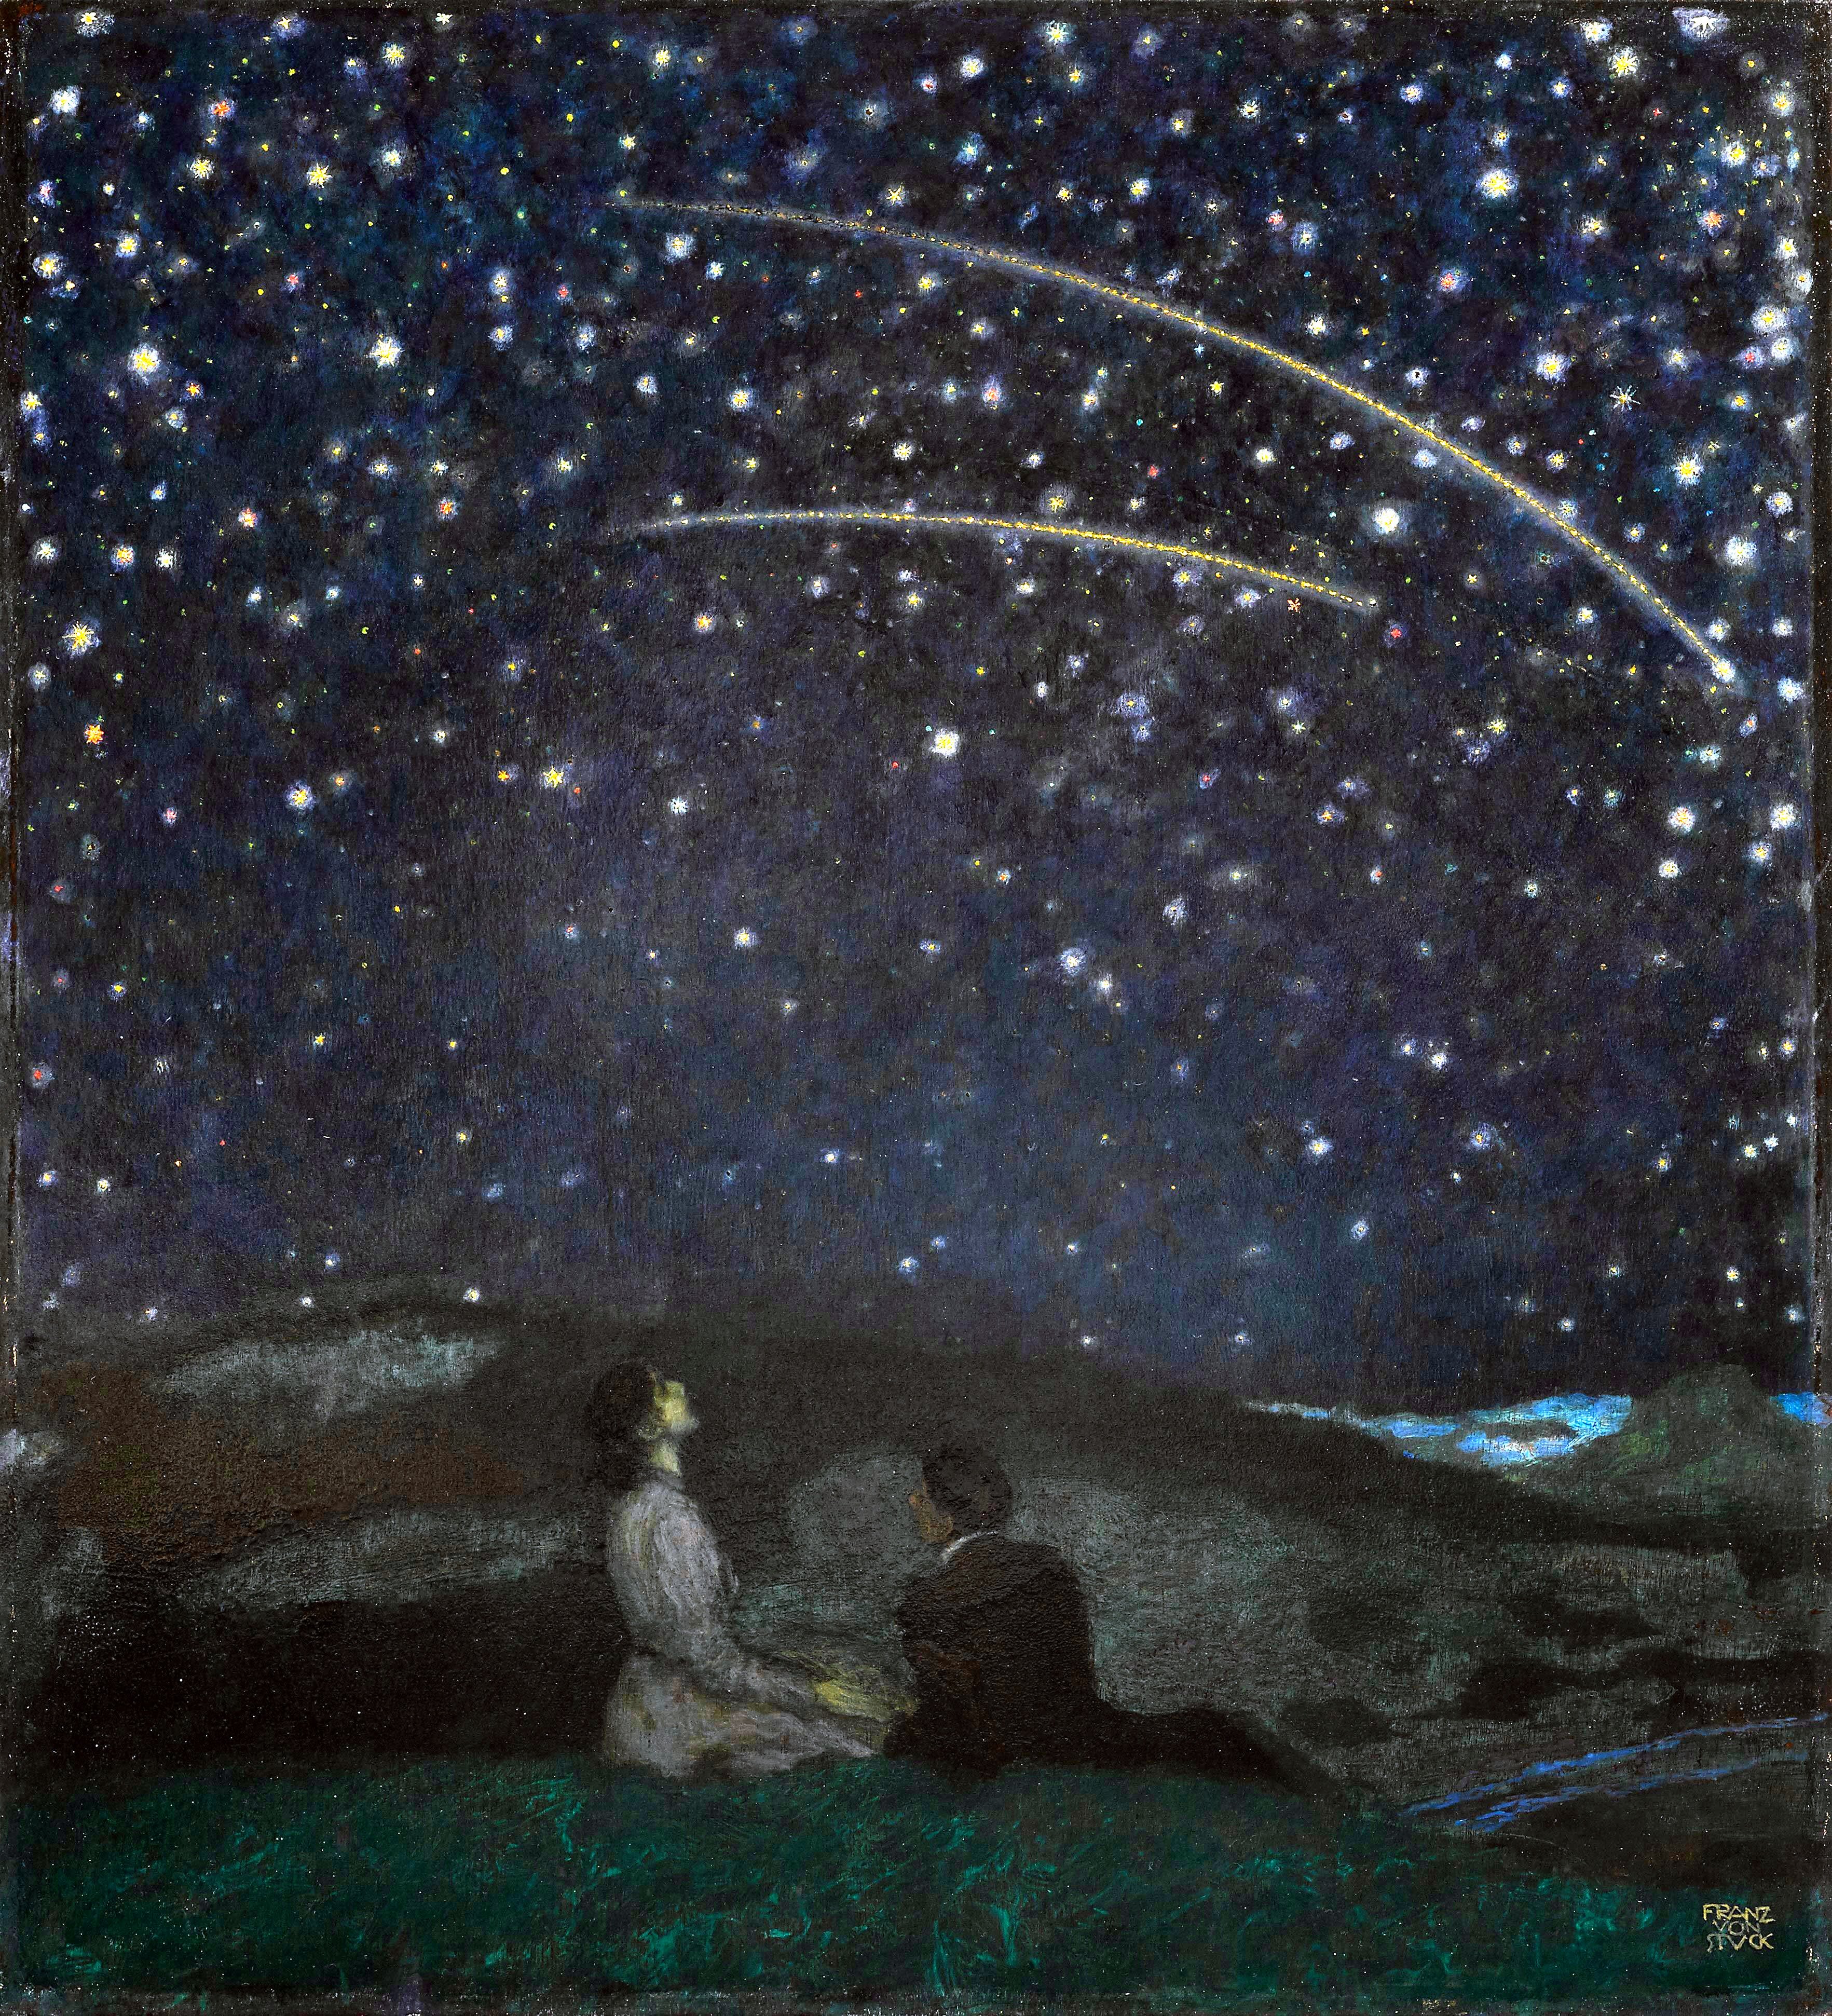 Painting of two people seated in the grass at night, looking up with awe at a sky full of stars and two meteors.